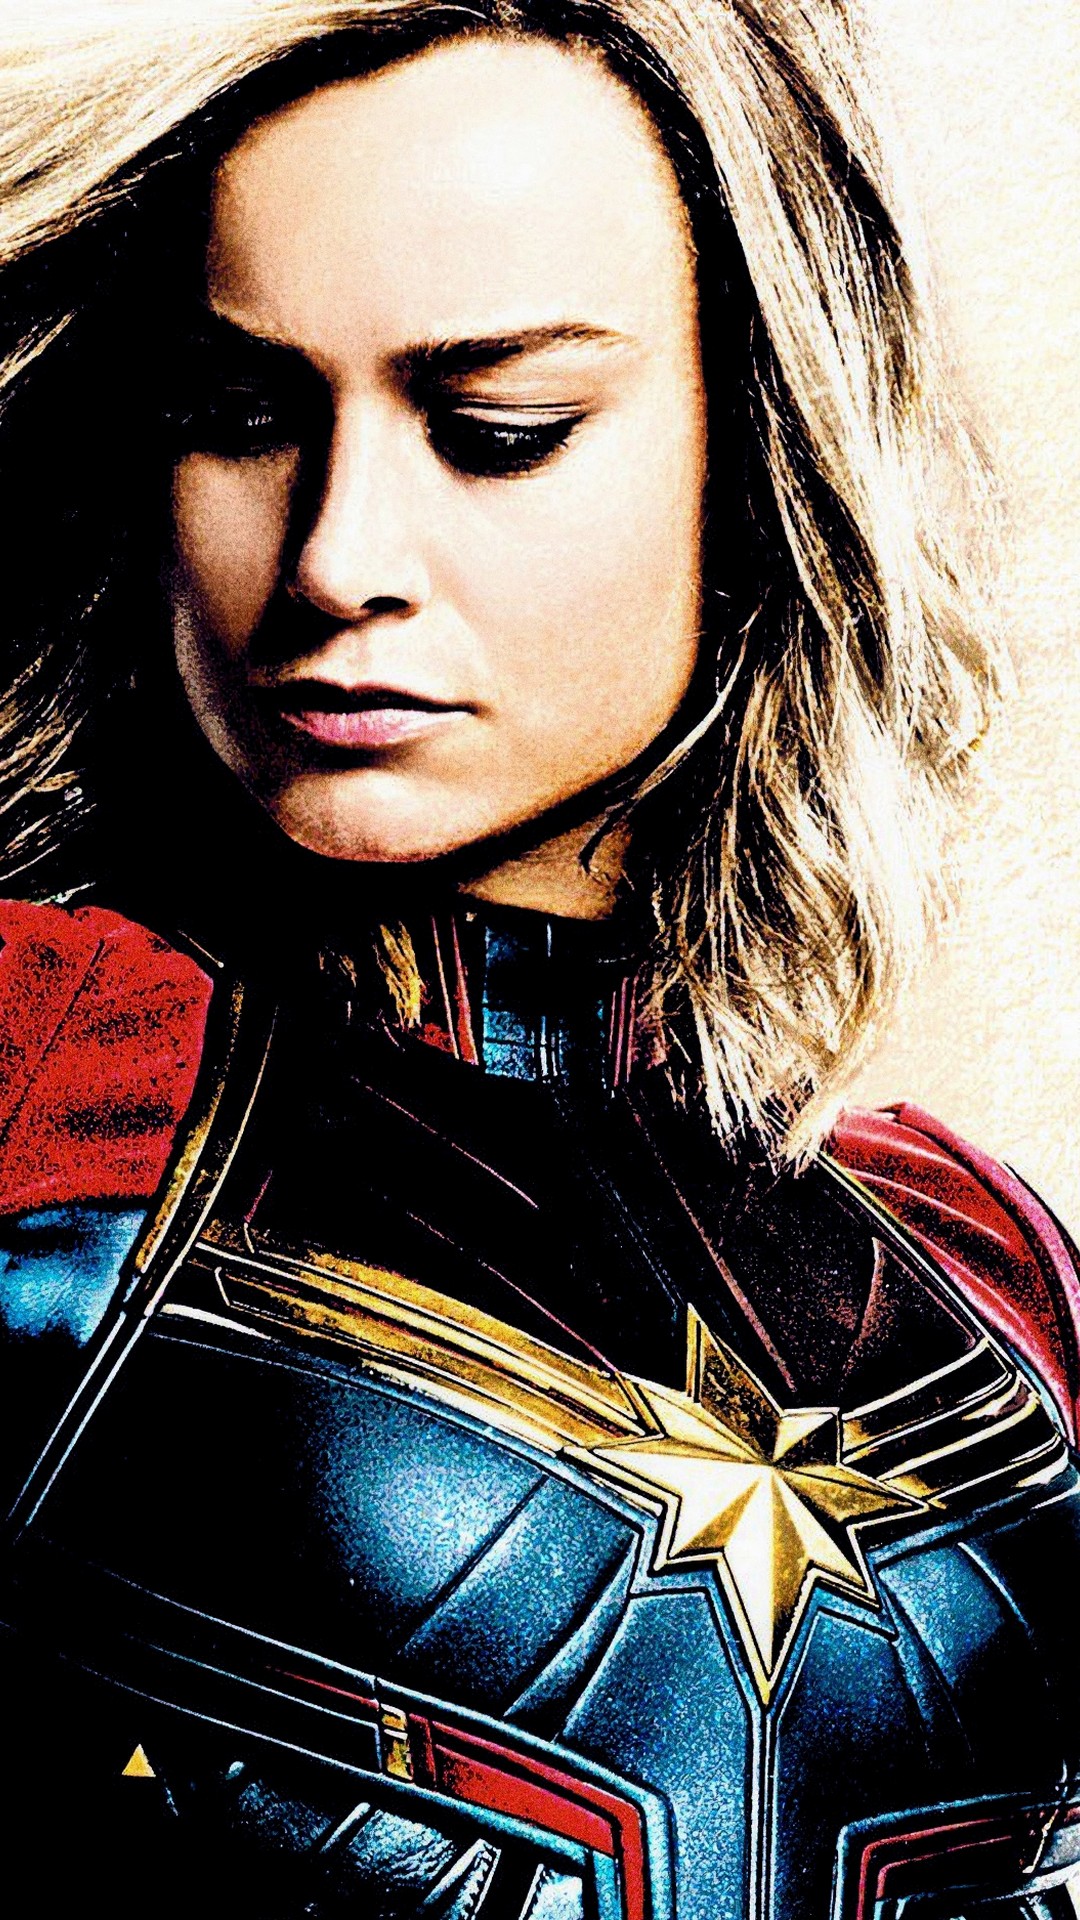 iPhone X Wallpaper Captain Marvel with high-resolution 1080x1920 pixel. You can use this wallpaper for your iPhone 5, 6, 7, 8, X backgrounds, Mobile Screensaver, or iPad Lock Screen